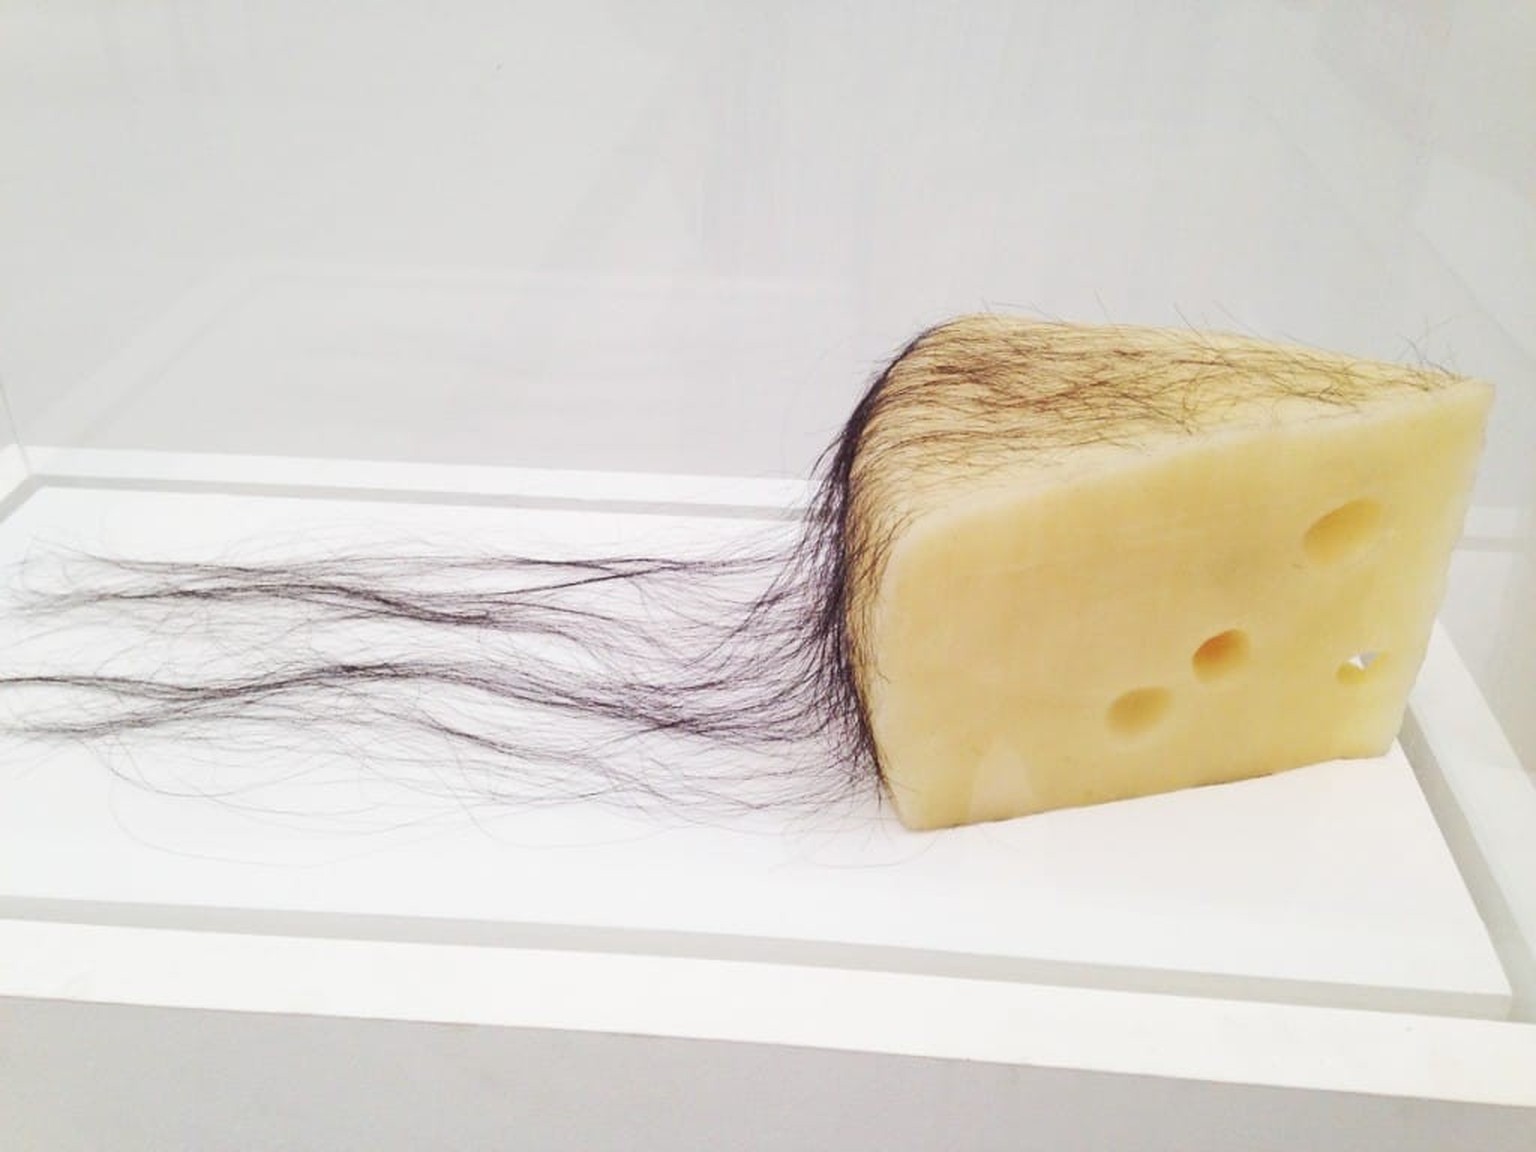 Robert Gober, Long Haired Cheese, 1992-93. Beeswax and human hair. LACMA.